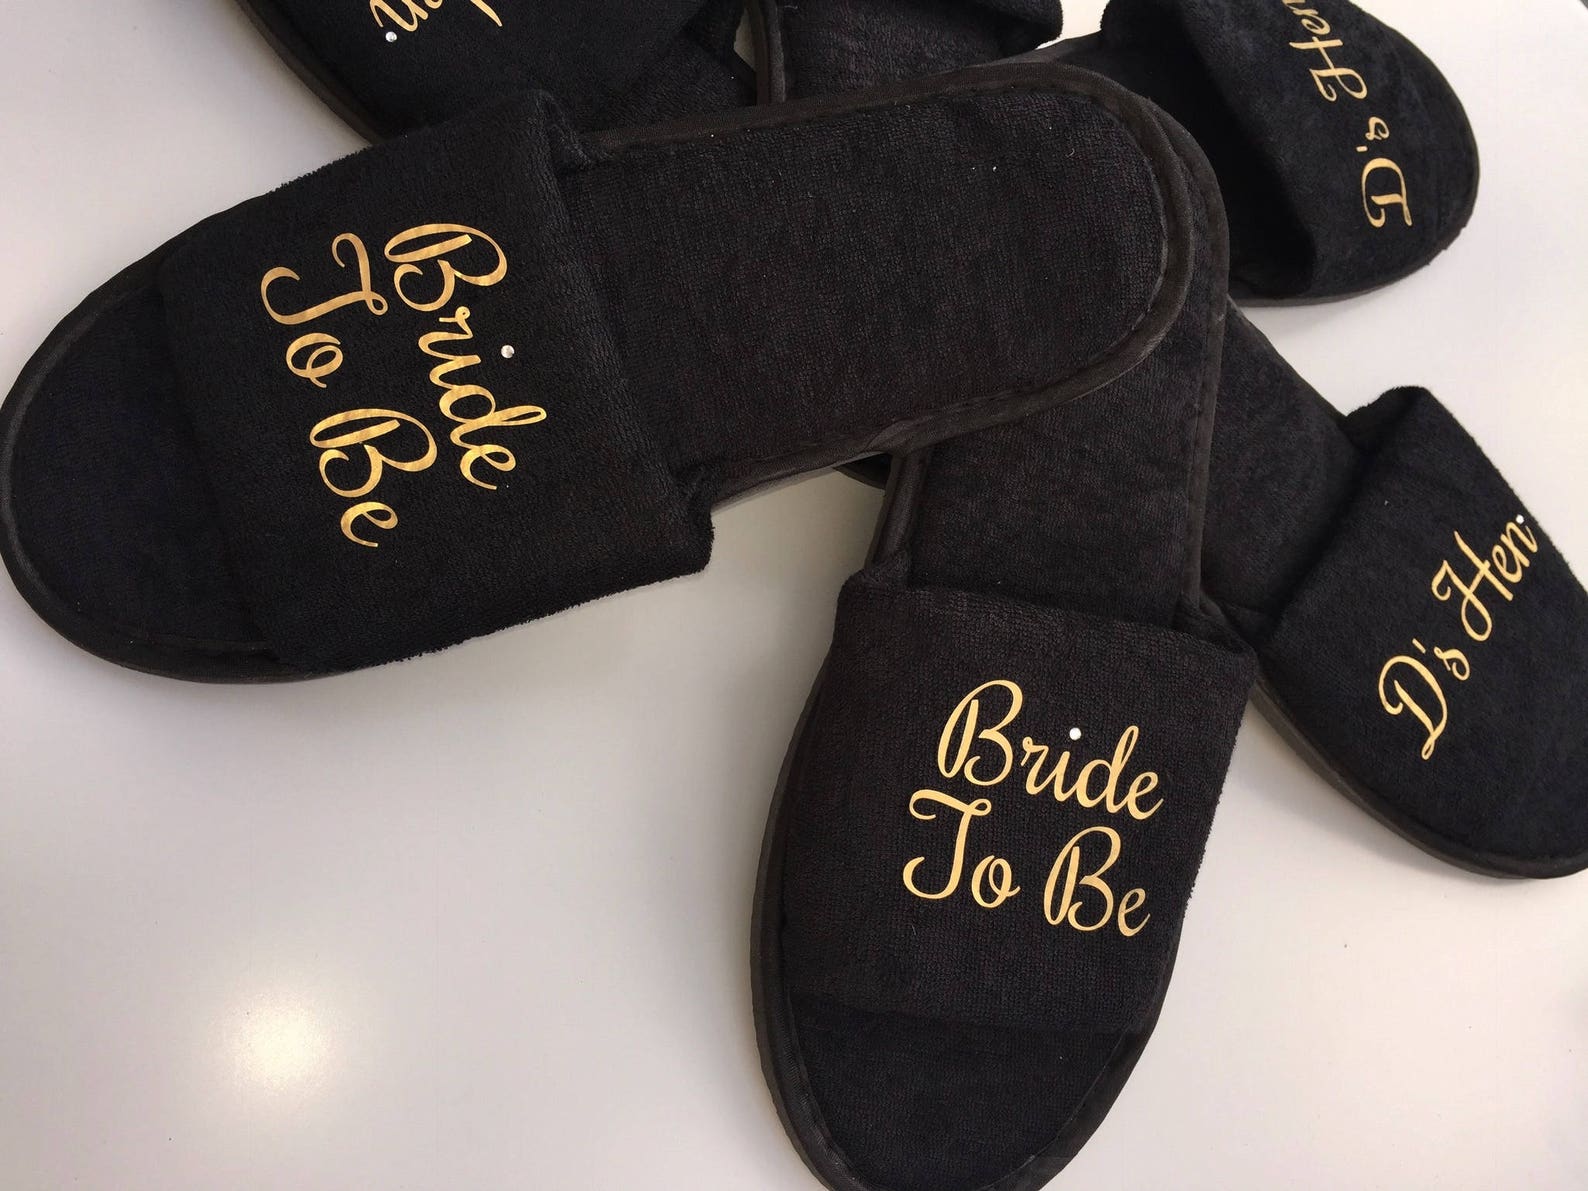 Bride slippers bridesmaid gift personalised slippers | Etsy